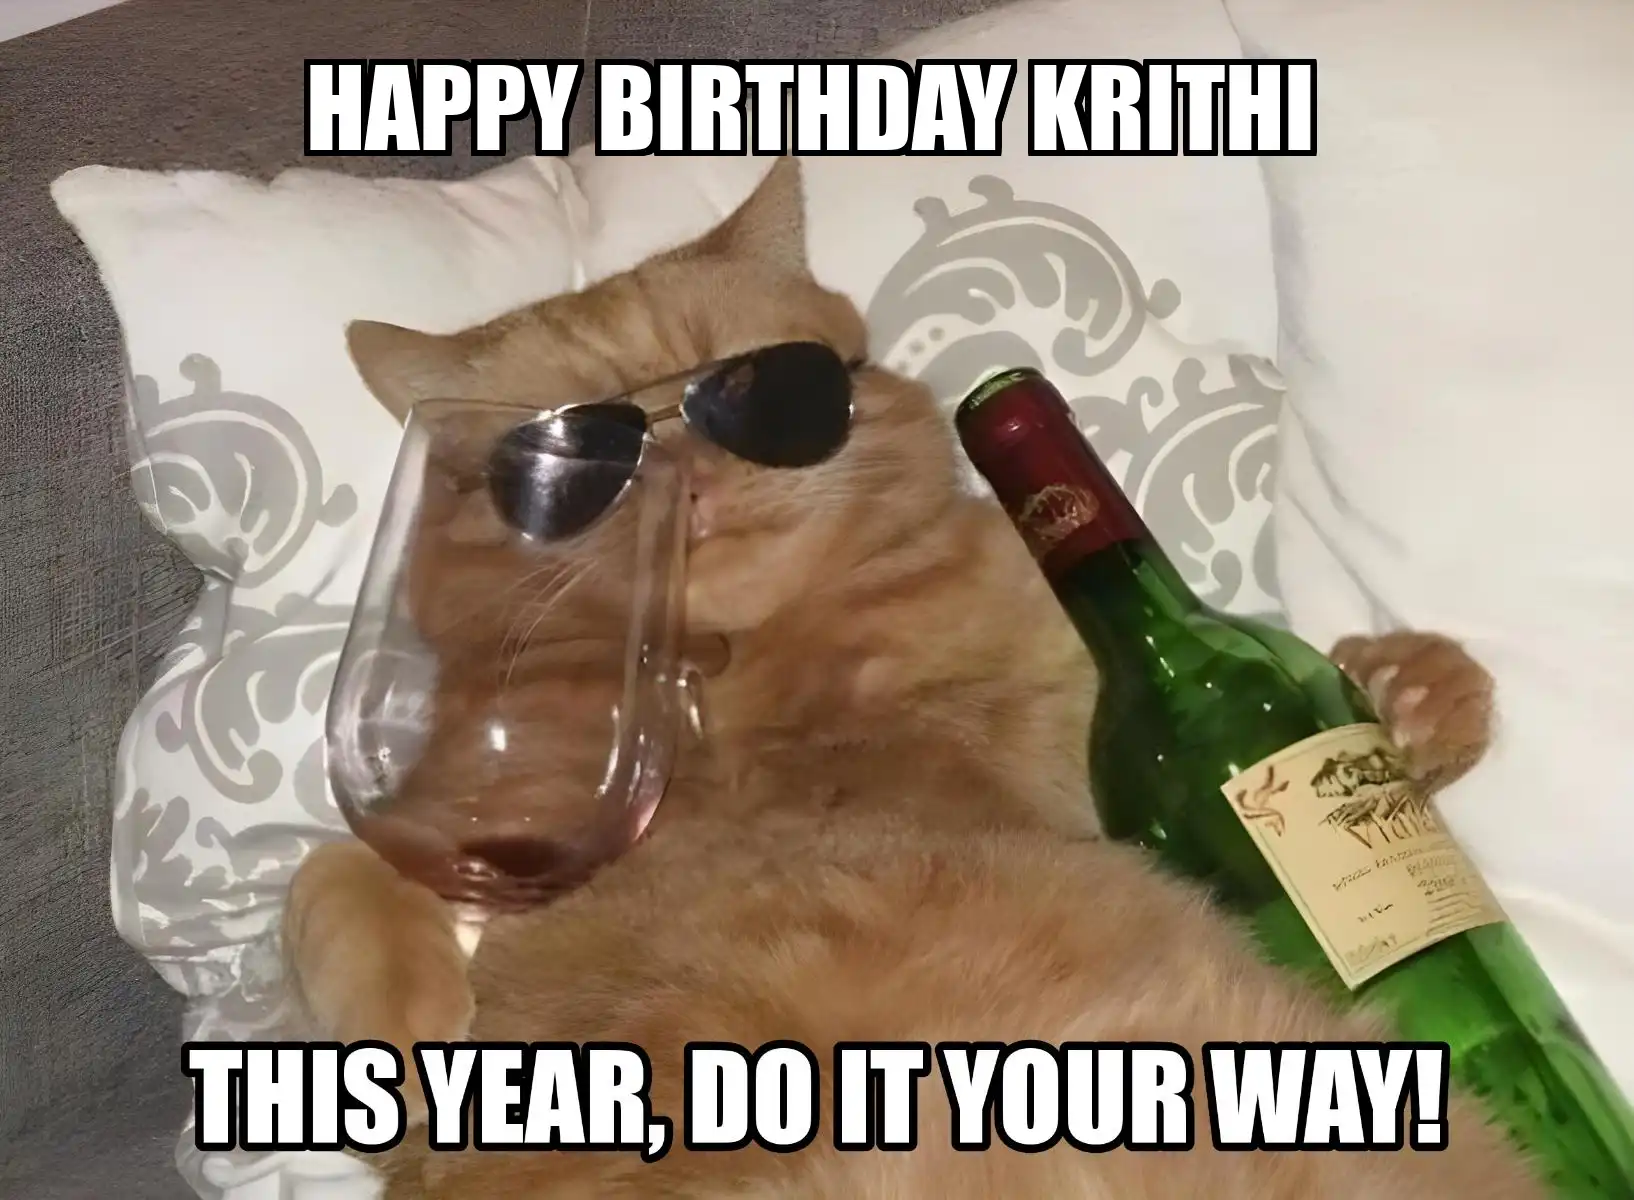 Happy Birthday Krithi This Year Do It Your Way Meme